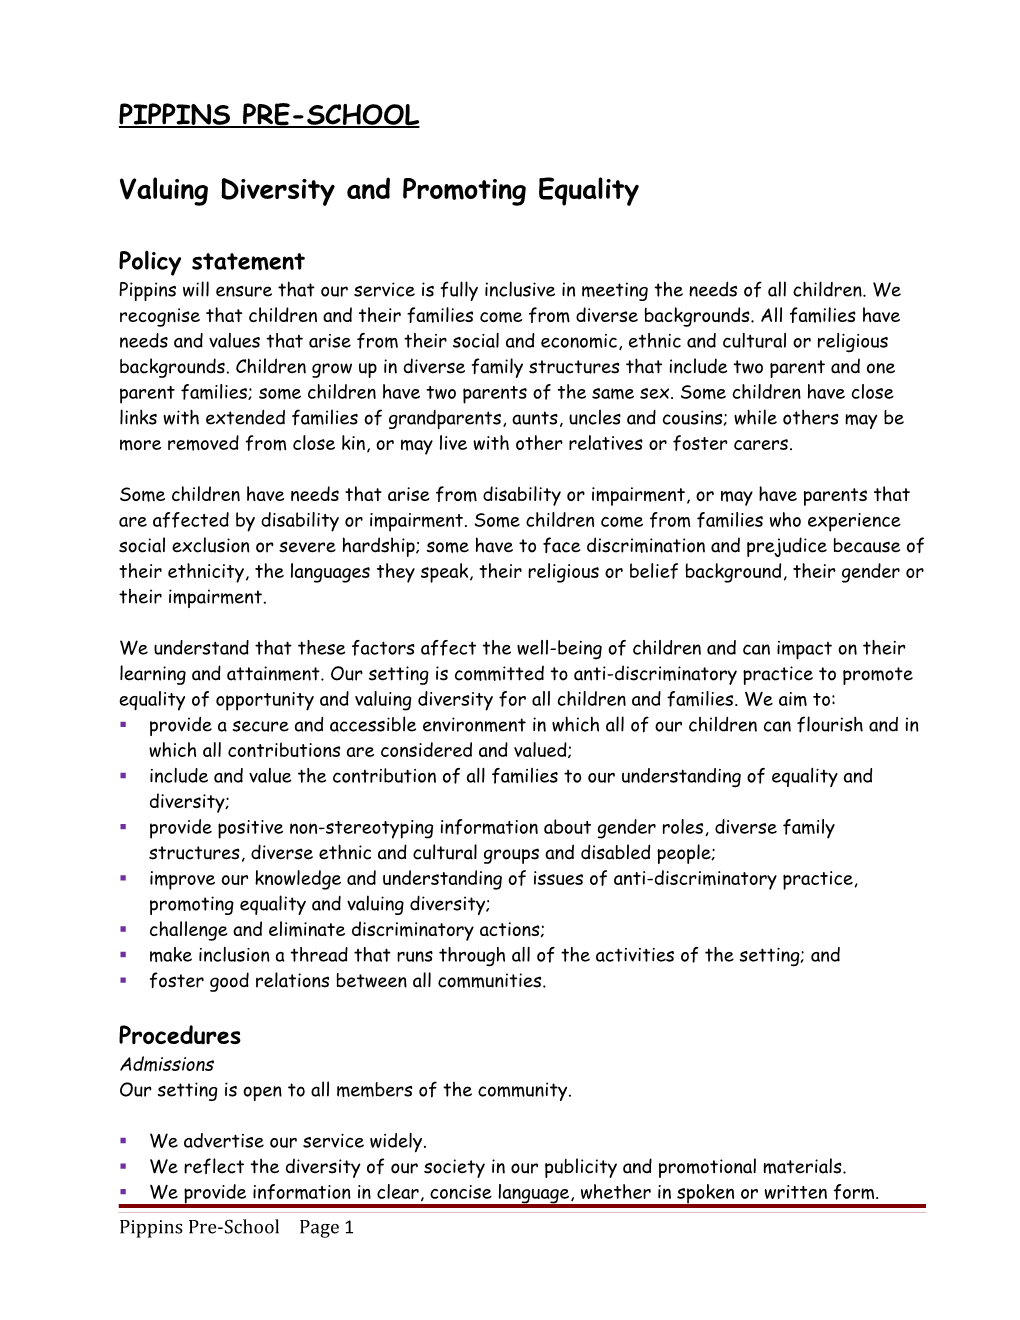 Valuing Diversity and Promoting Equality